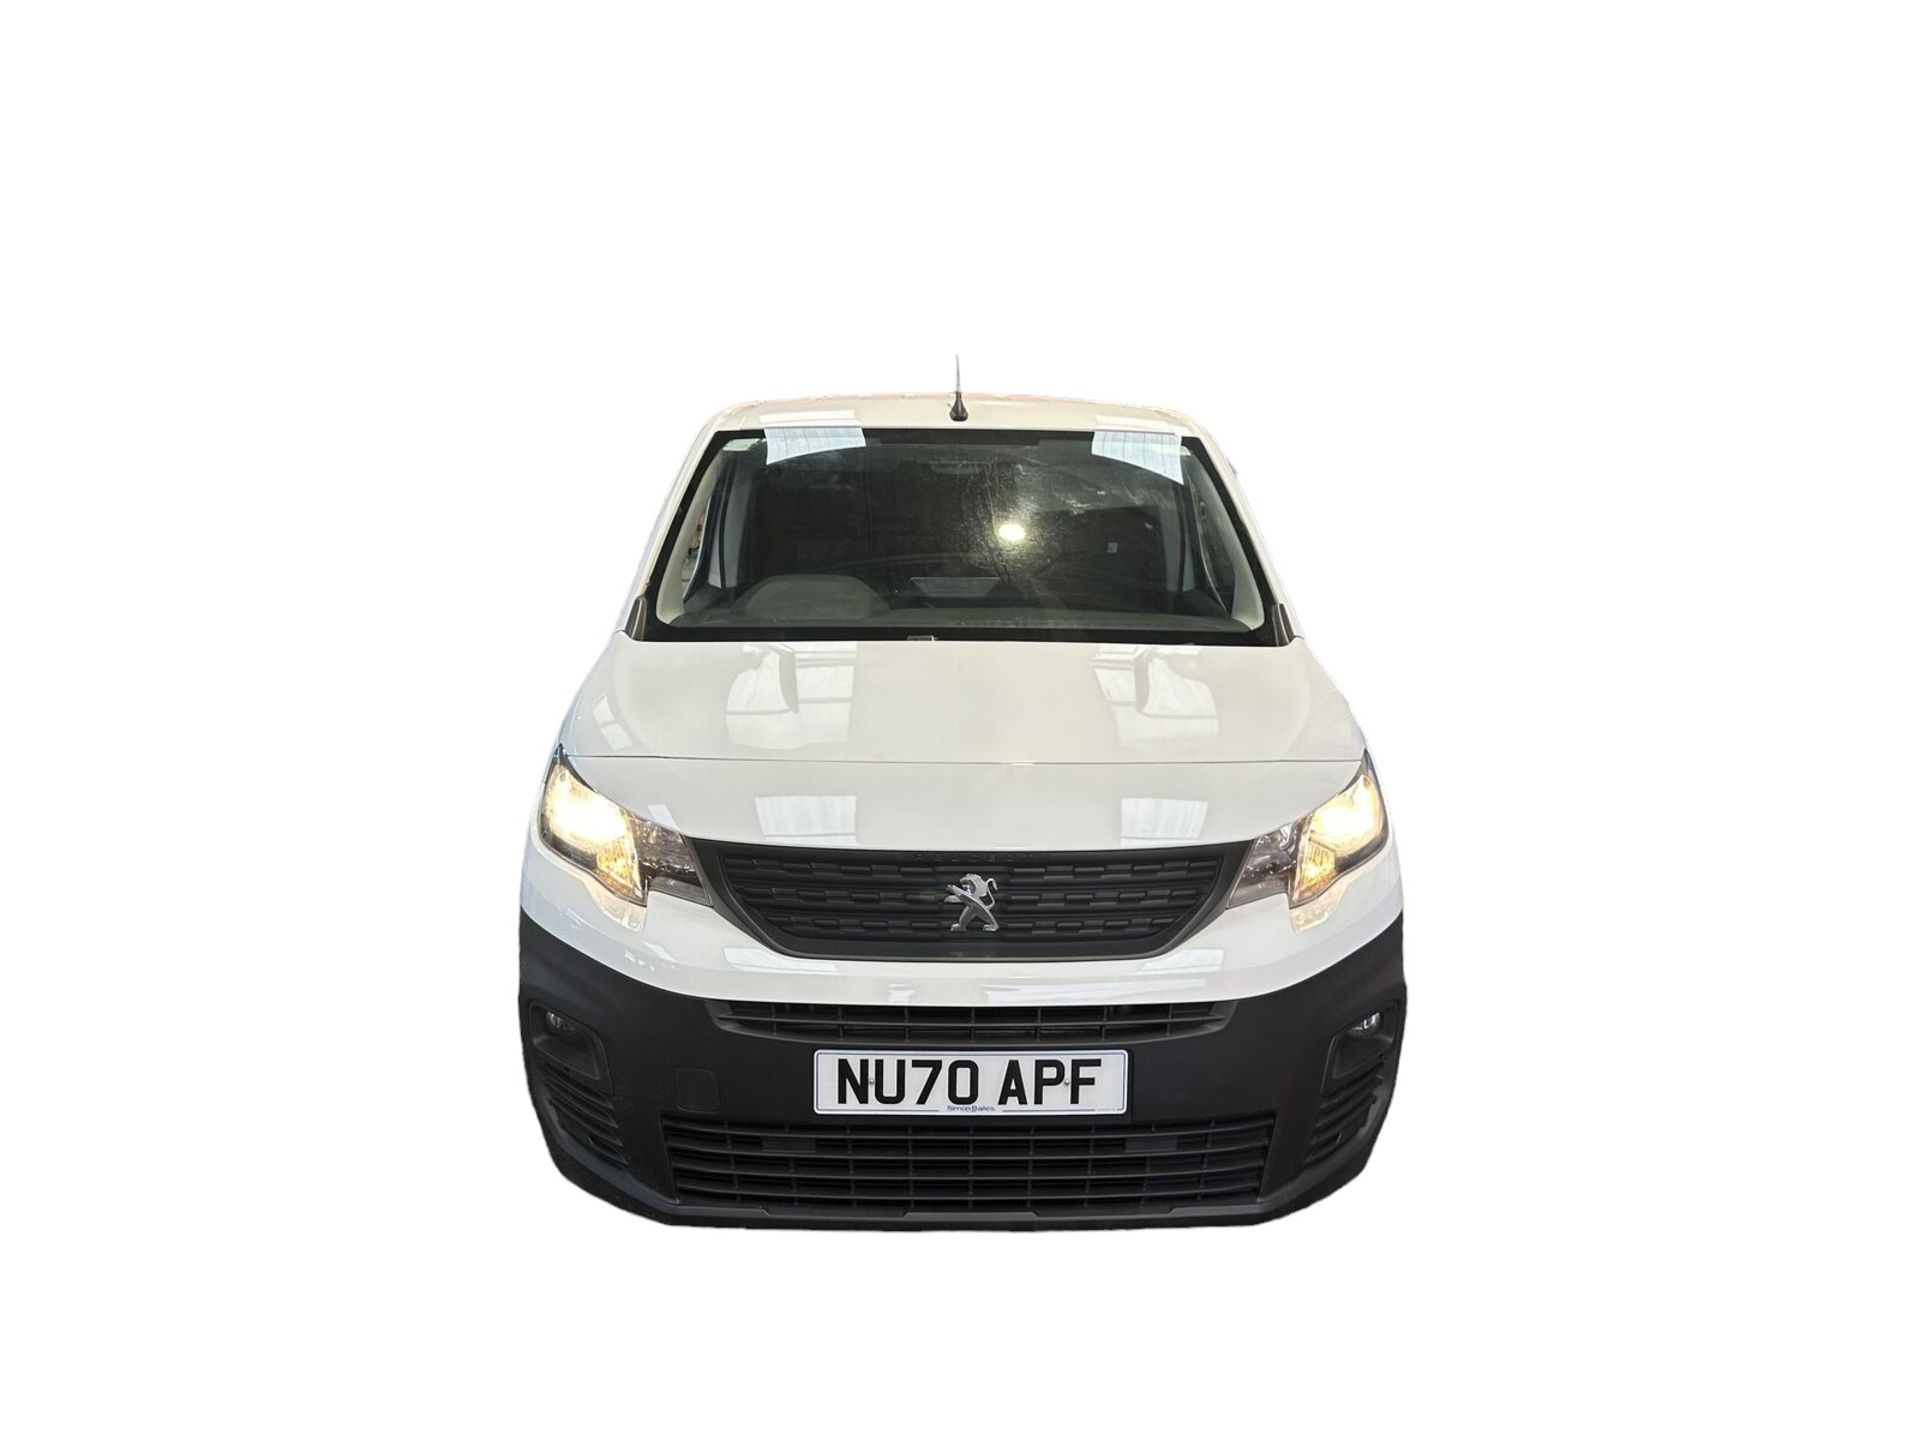 VAN-READY SOLUTION: '70 PLATE PEUGEOT PARTNER - FIRST-CLASS FIND